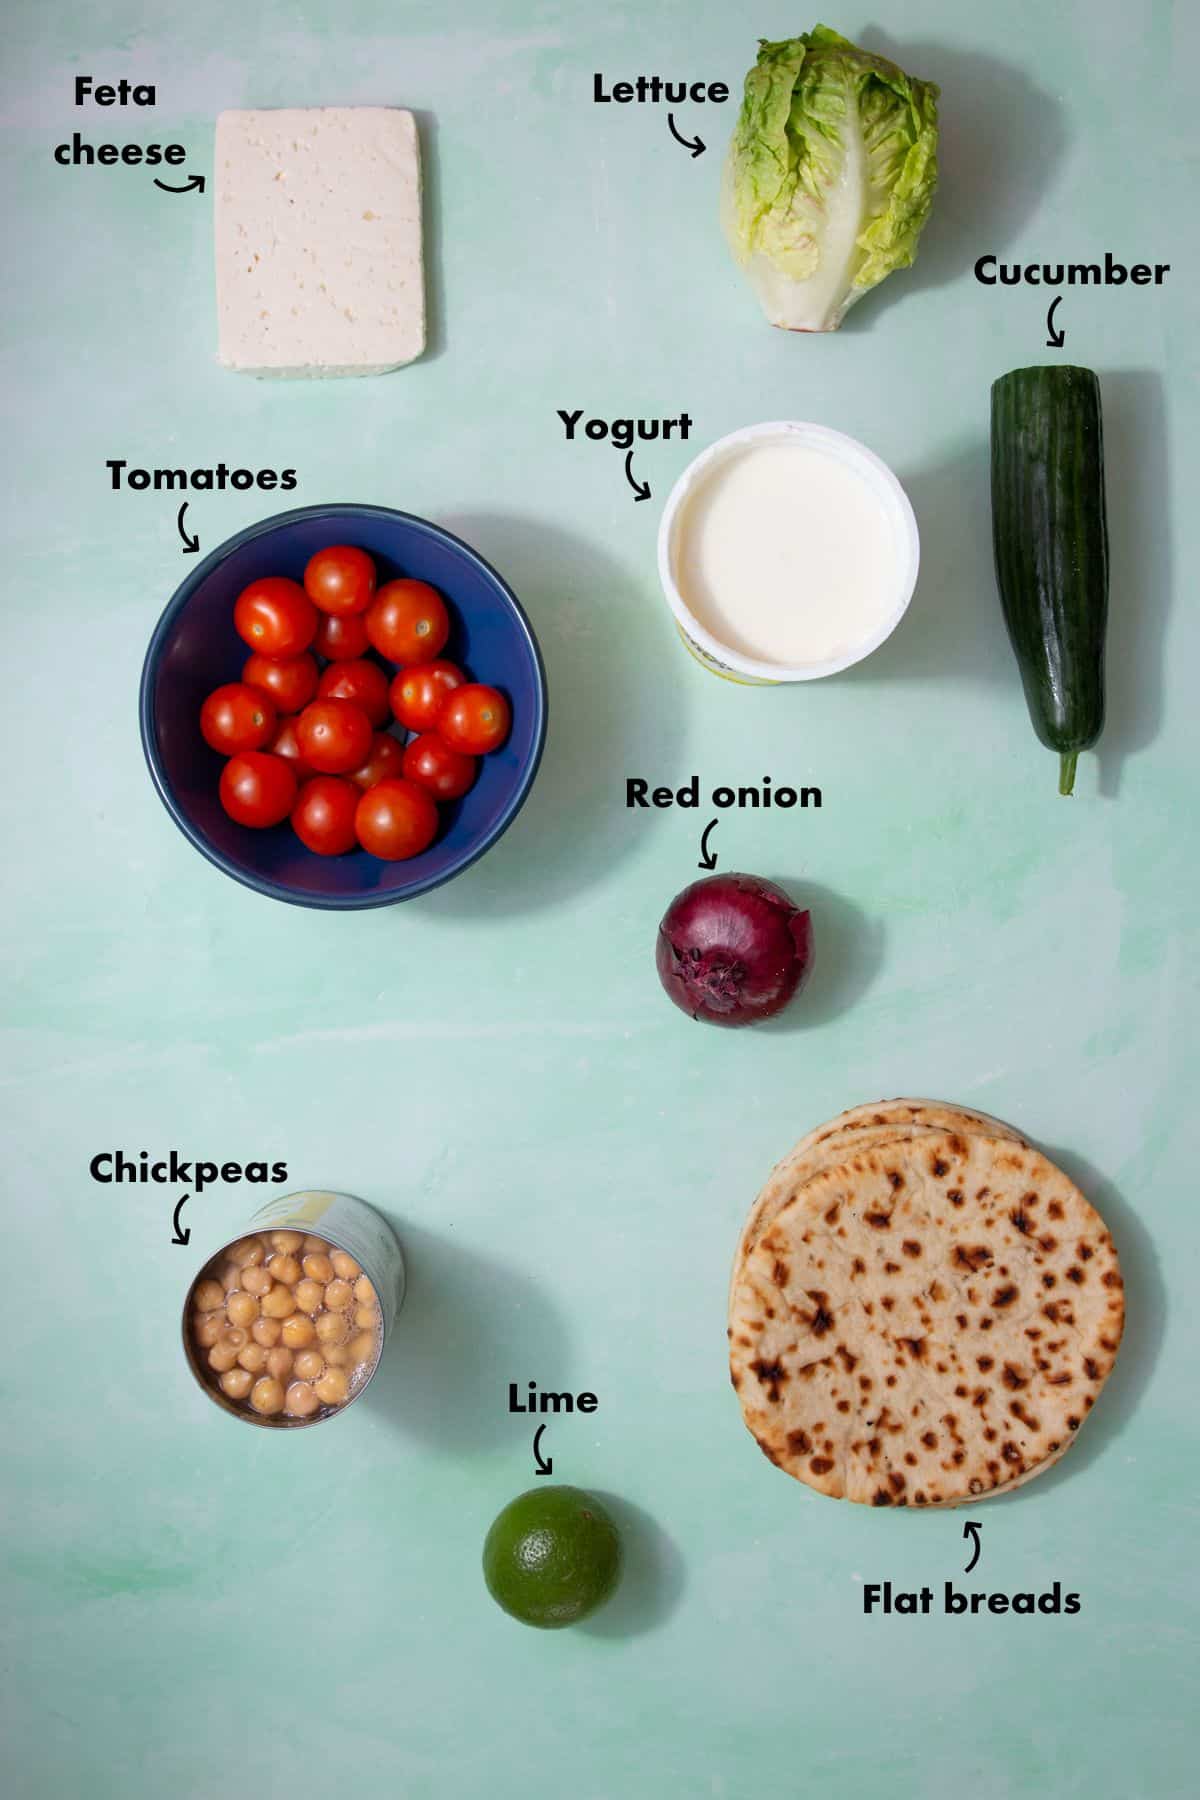 Ingredients to make a chickpea and feta wrap liad out on a pale blue background and labelled.